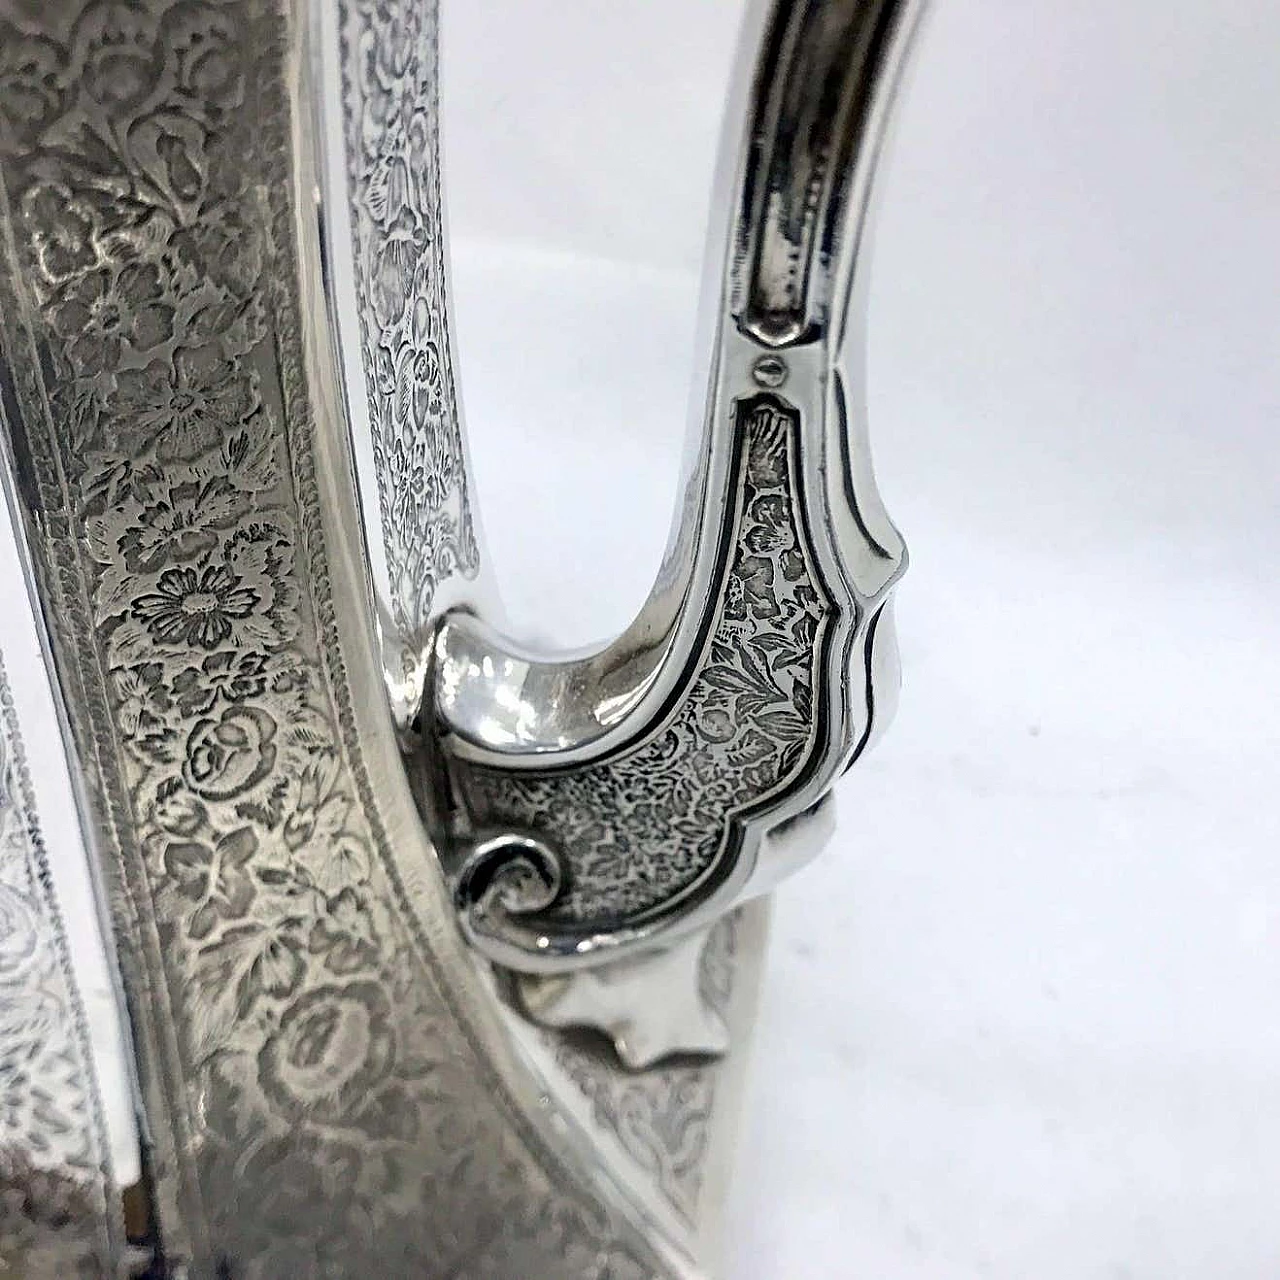 Art Nouveau tea service in engraved silver plated by Skinner & Co, 19th century 1344362